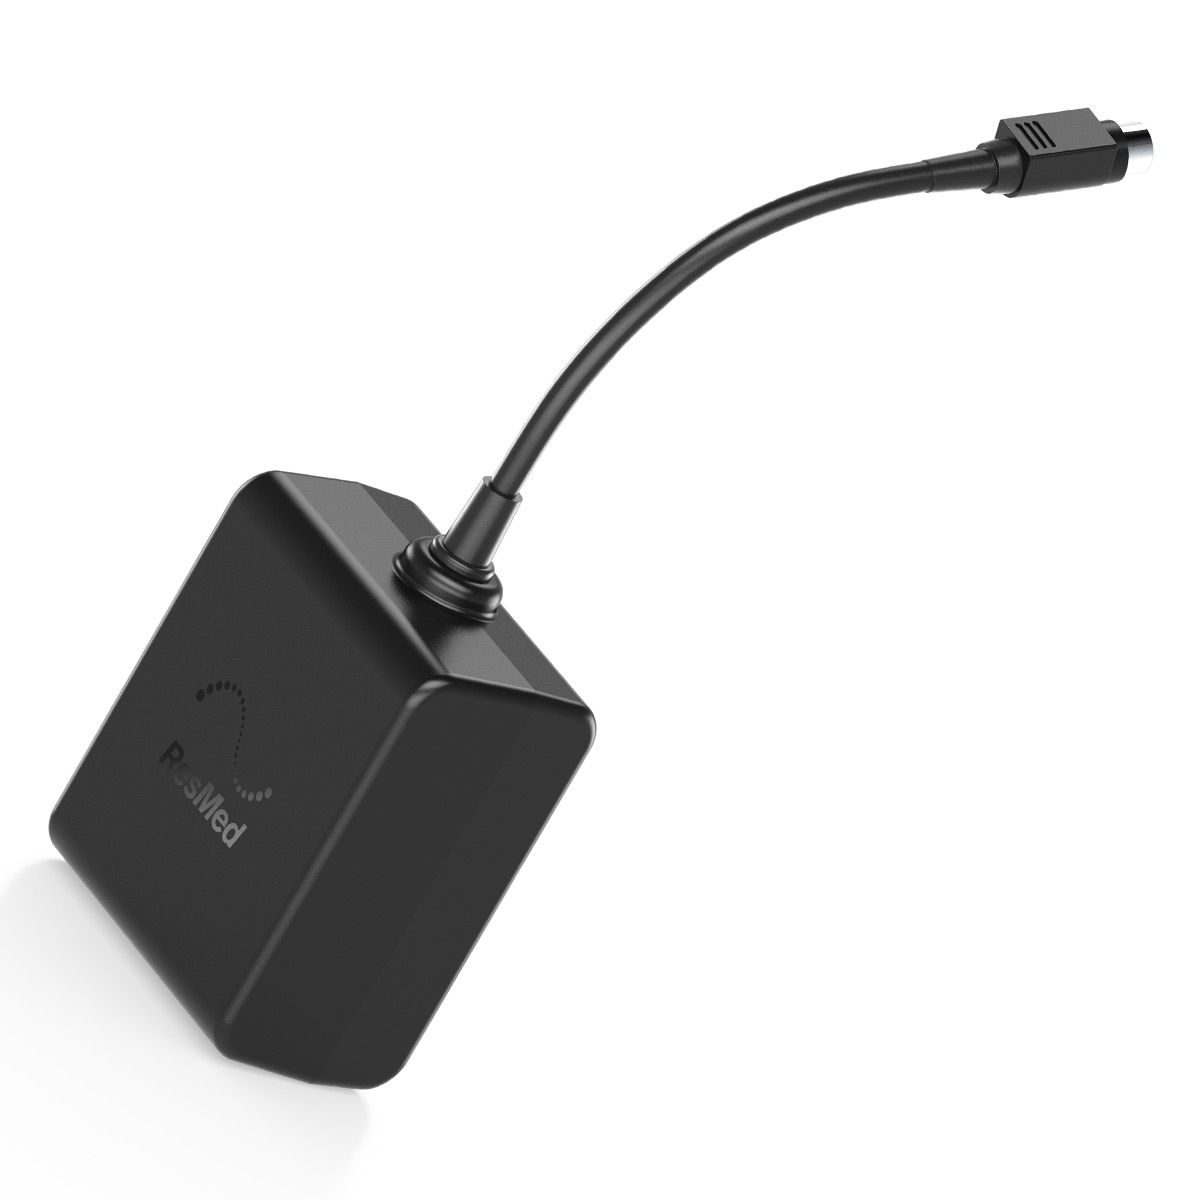 External Battery for Mobi Concentrators (DISCONTINUED)